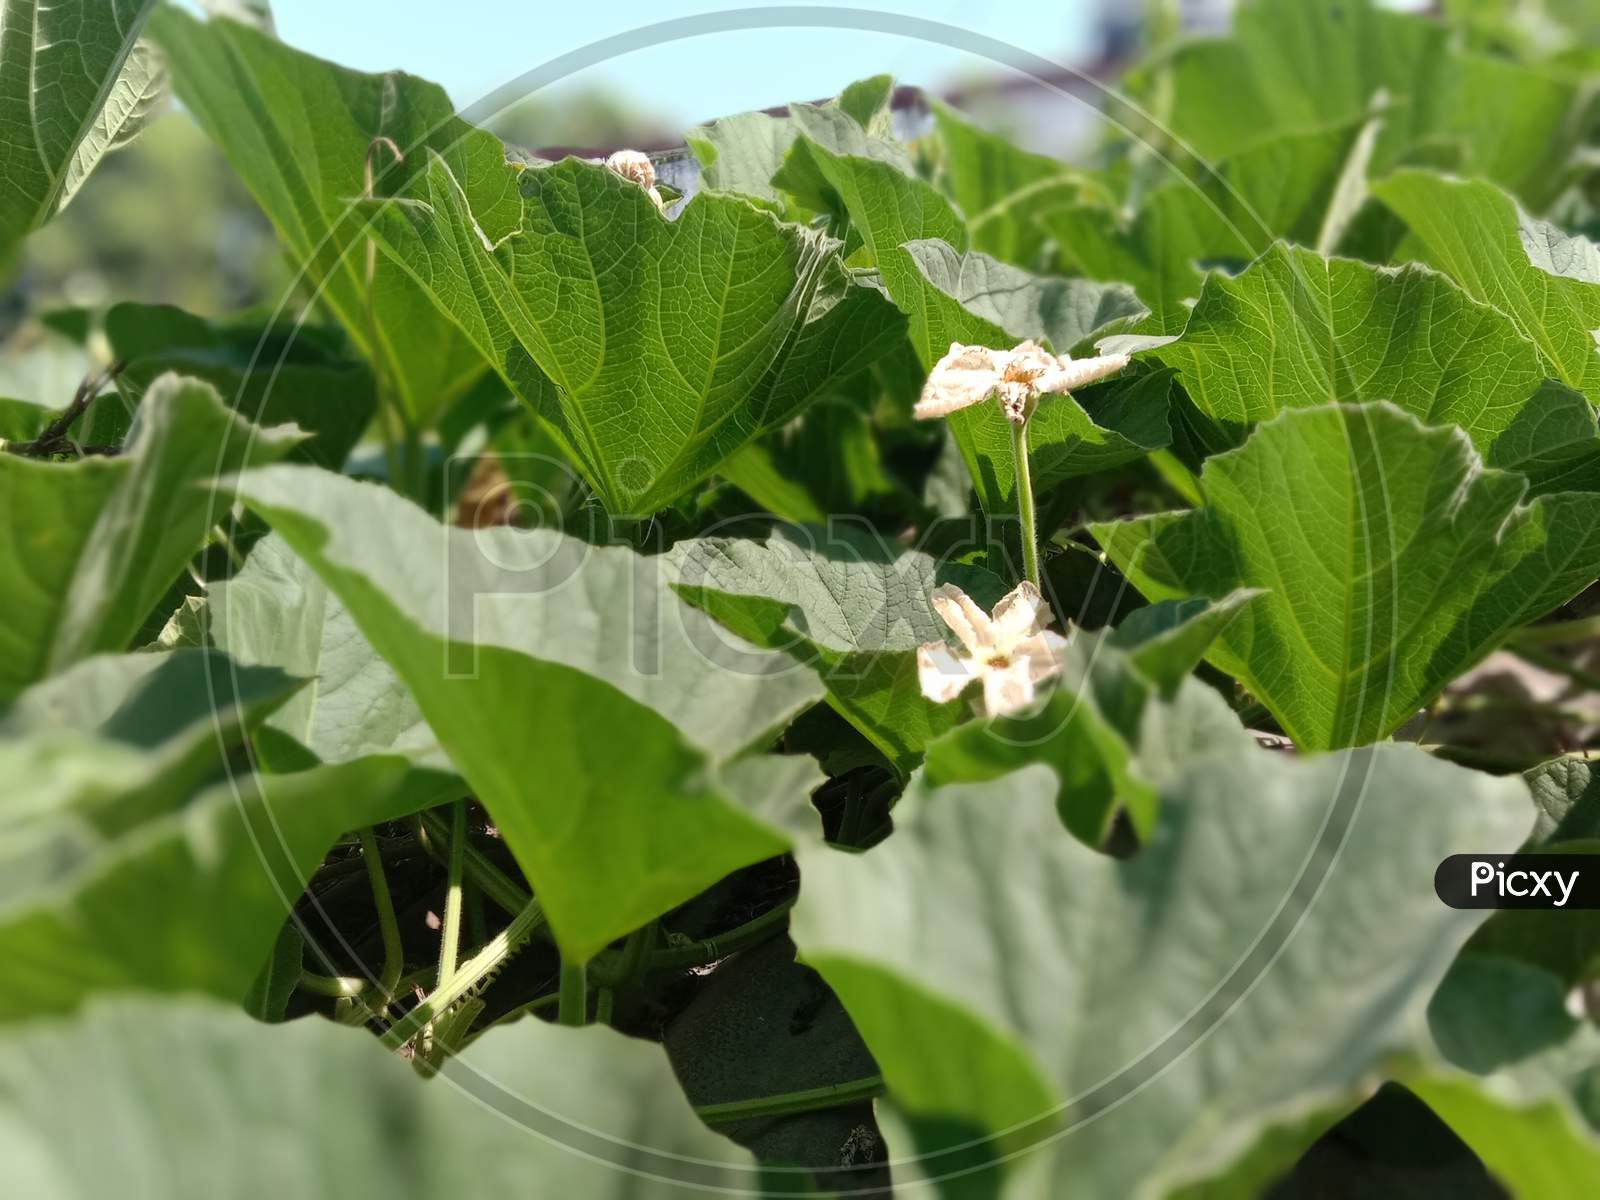 the very beautiful and green pumpkin leaves with flowers.